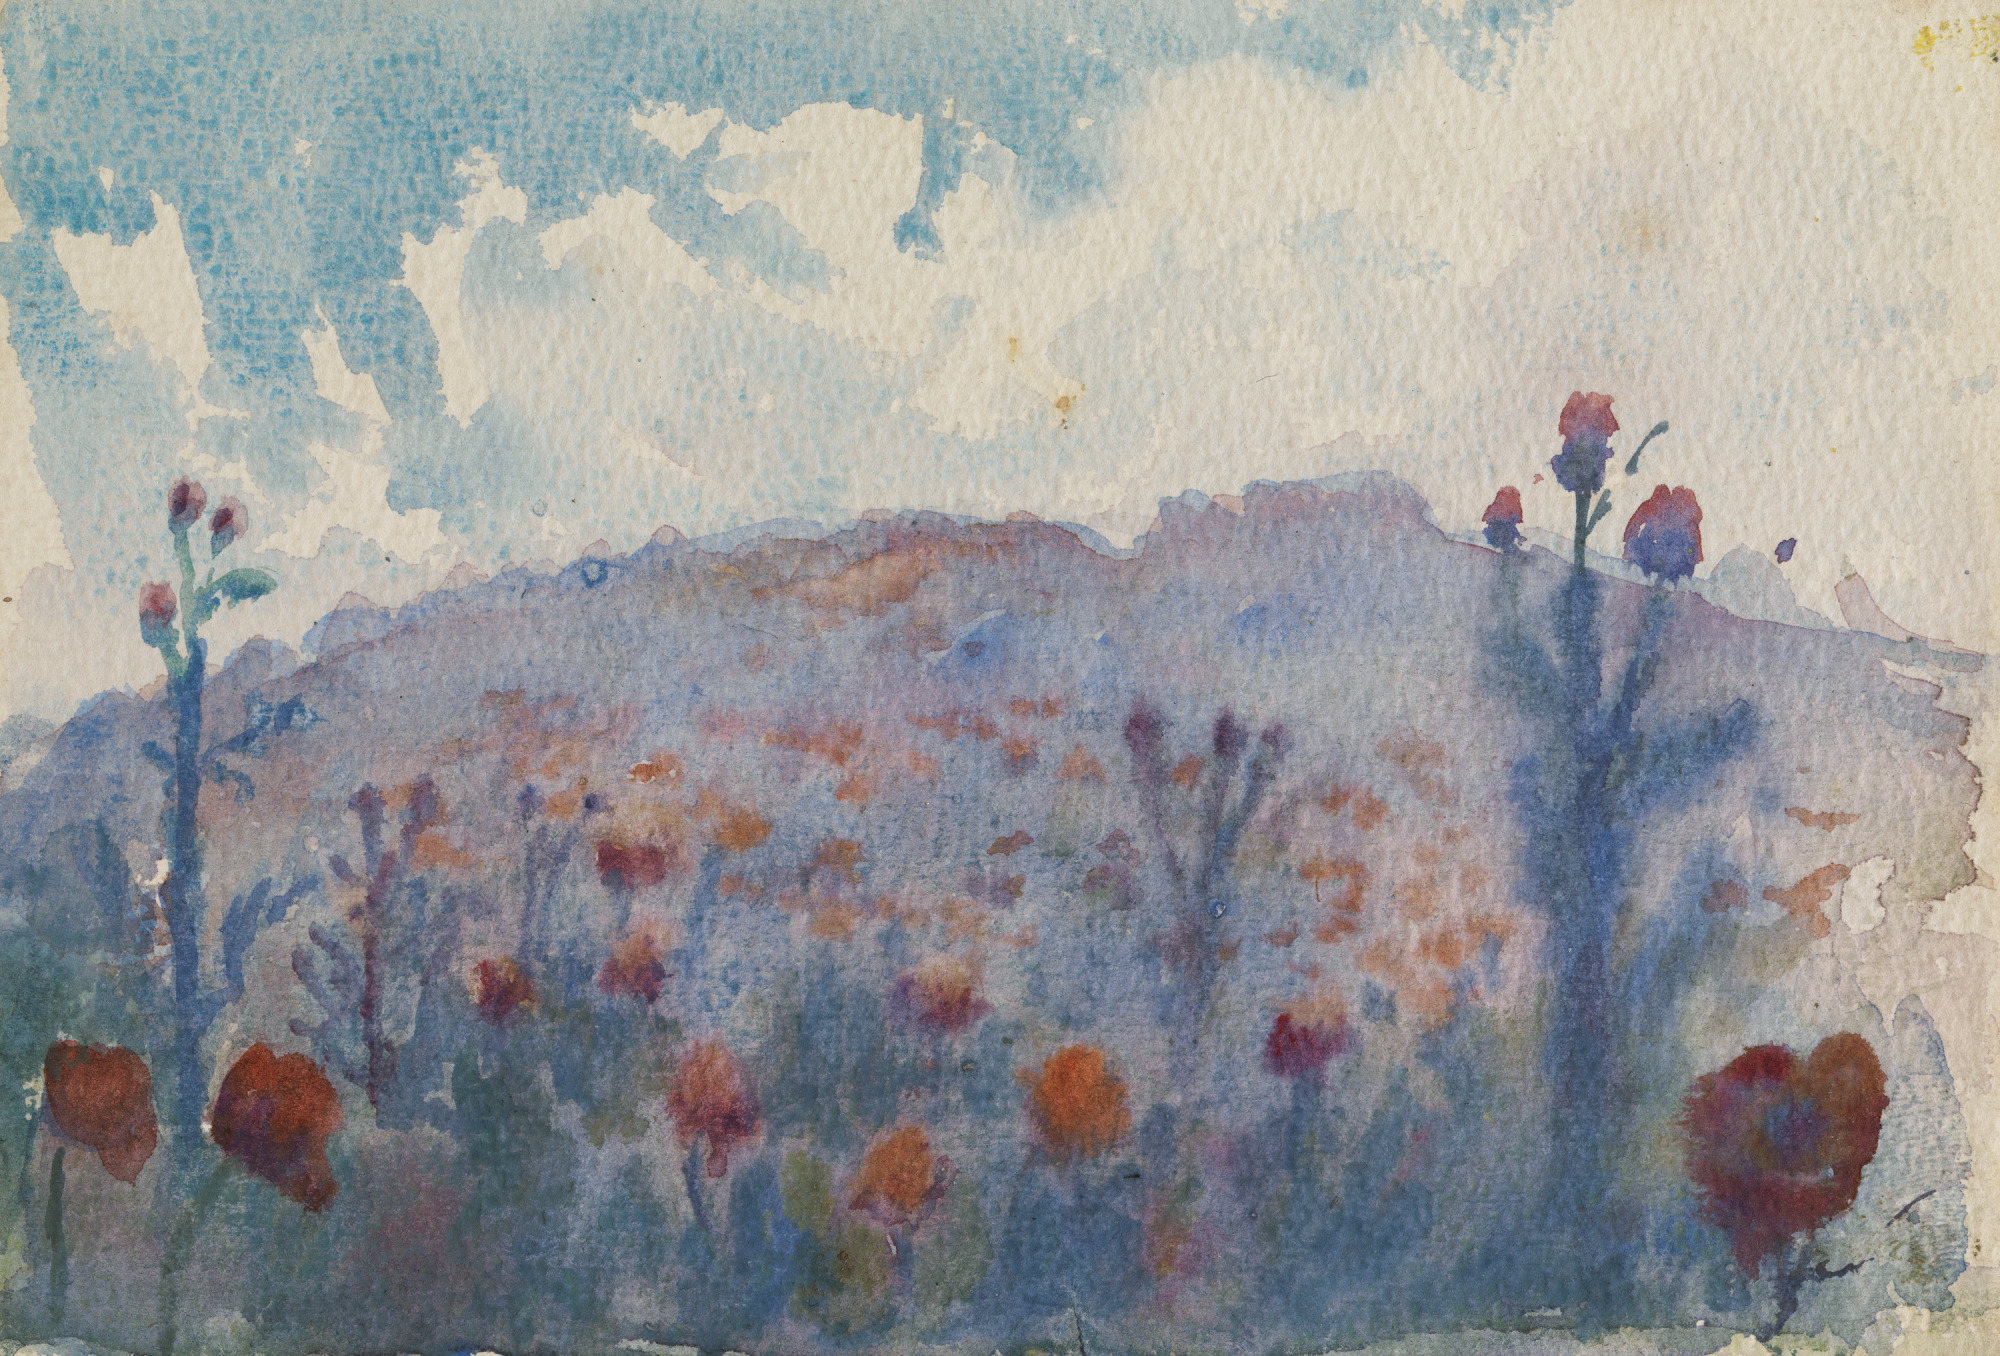 Wild Poppies, Mont Kemmel, Kenneth Macqueen, 1917 or 1918, watercolour on paper